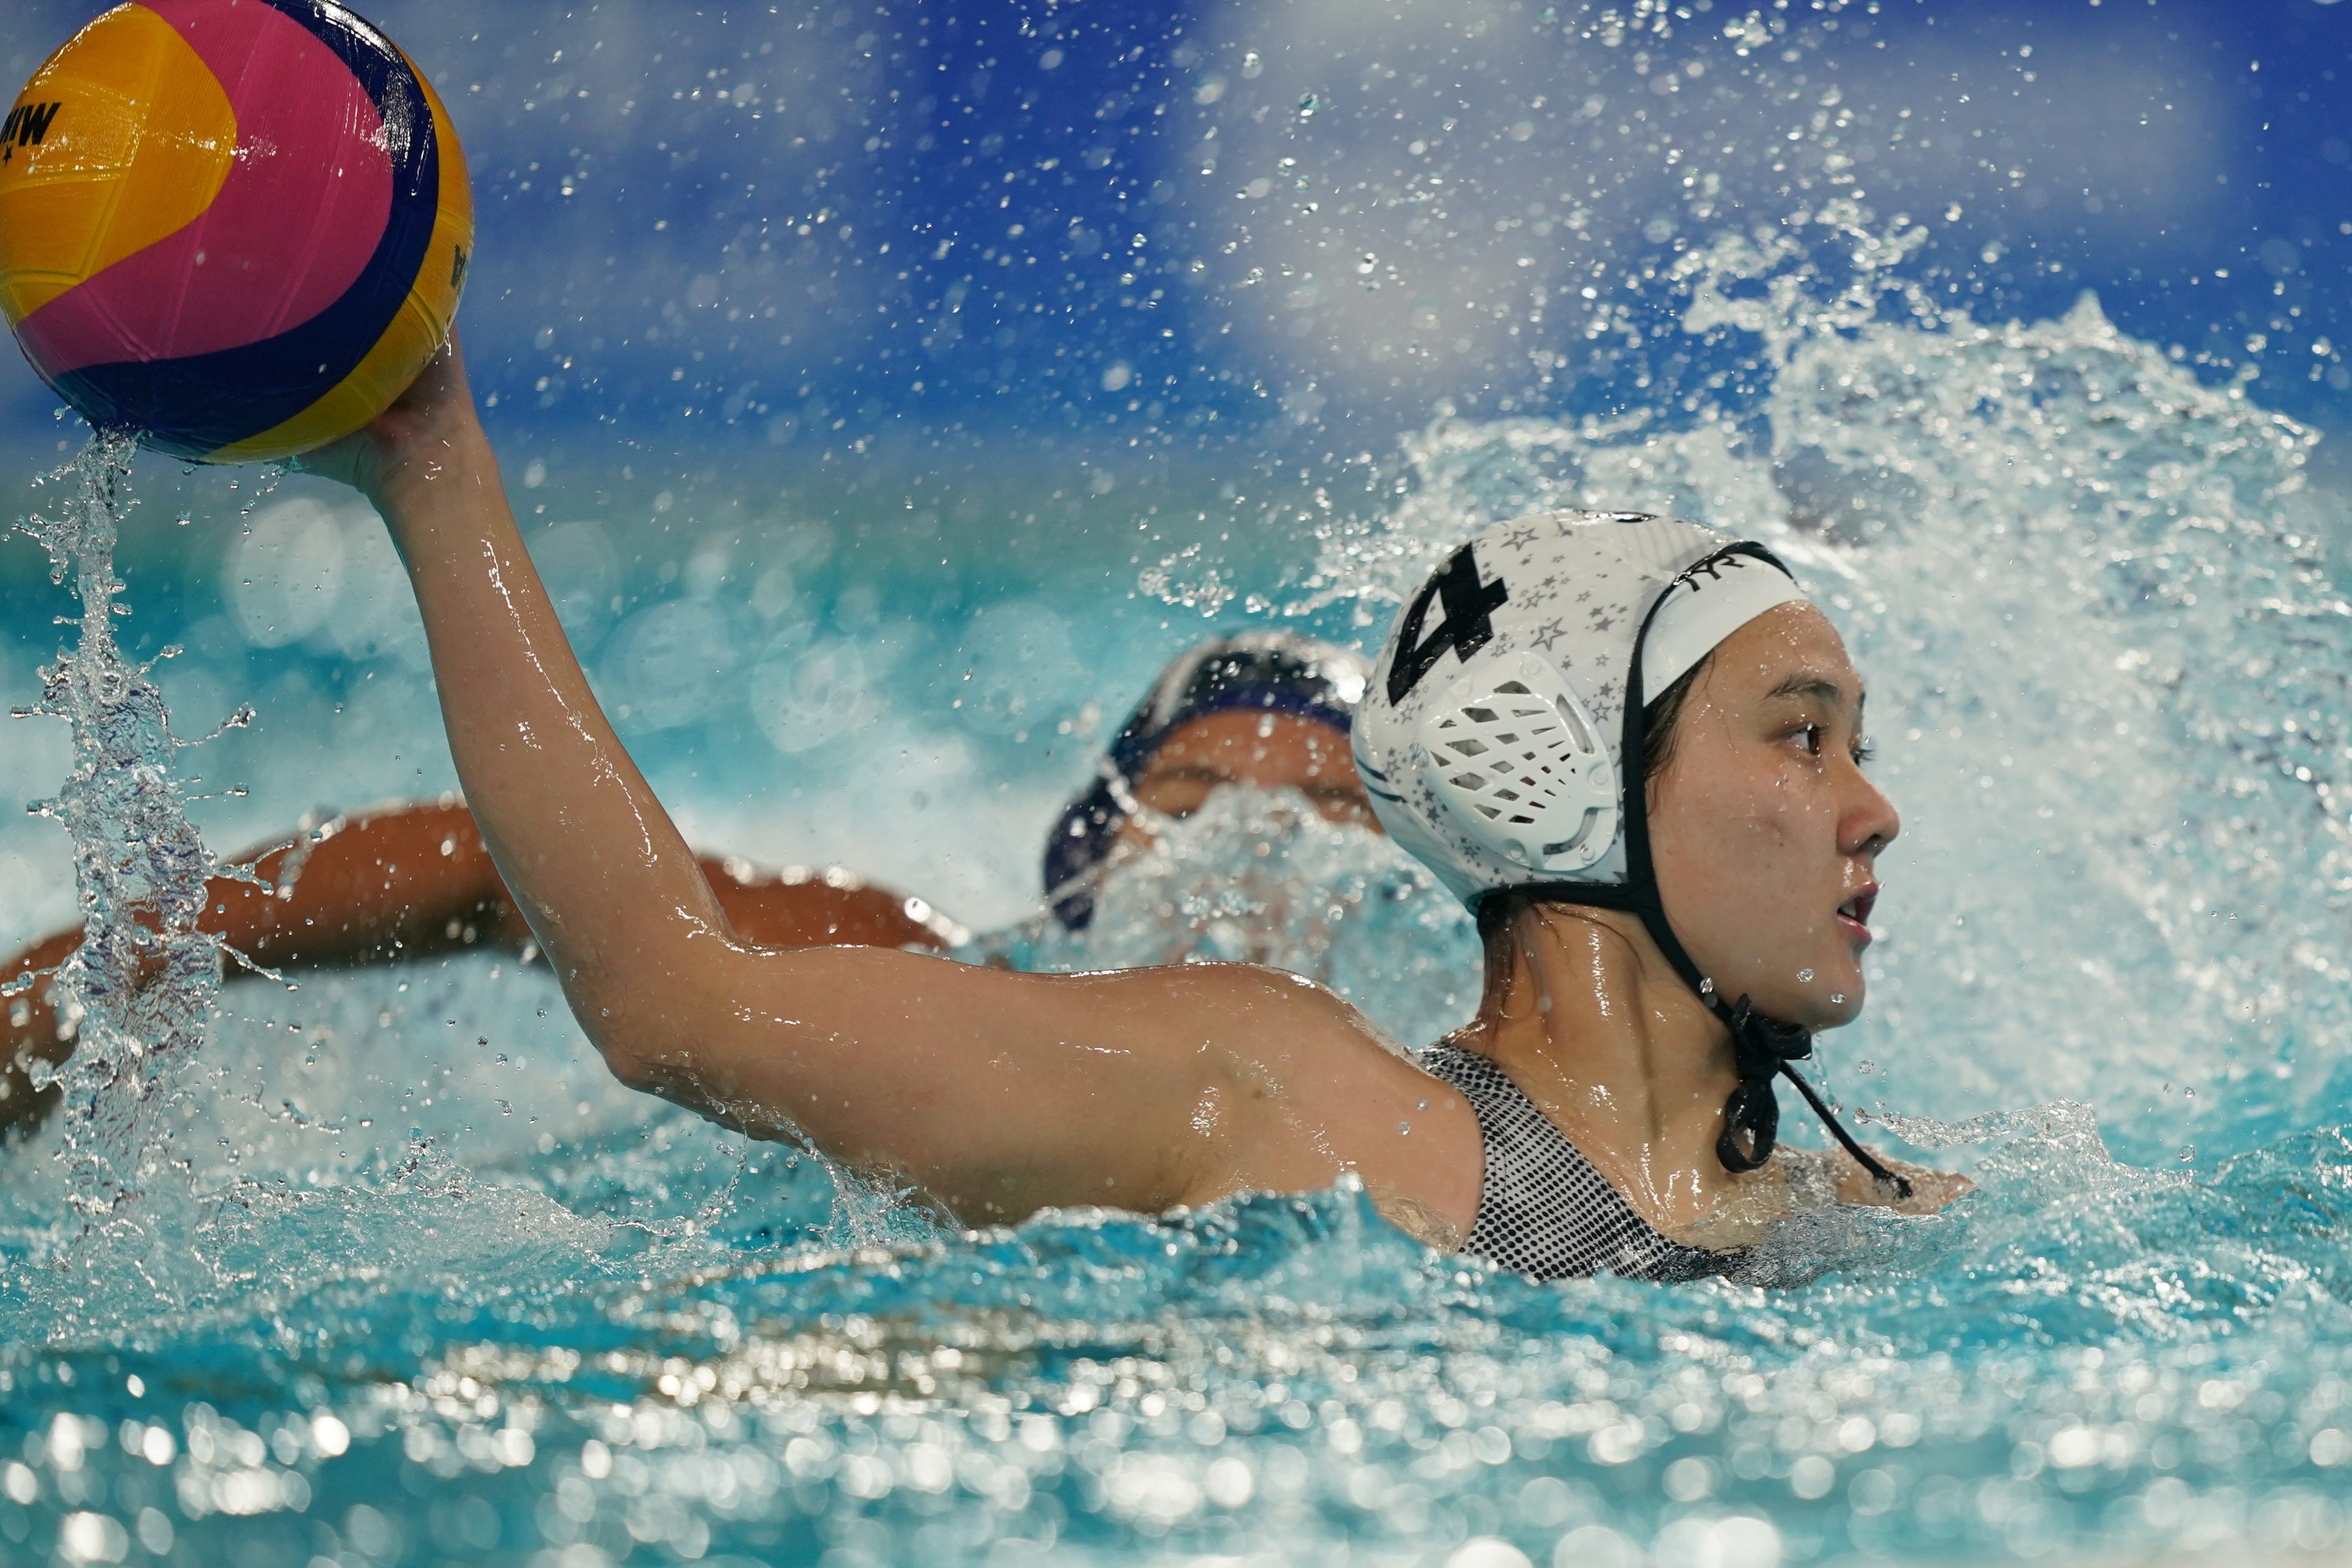 20230928_waterpolo_w_bf_037